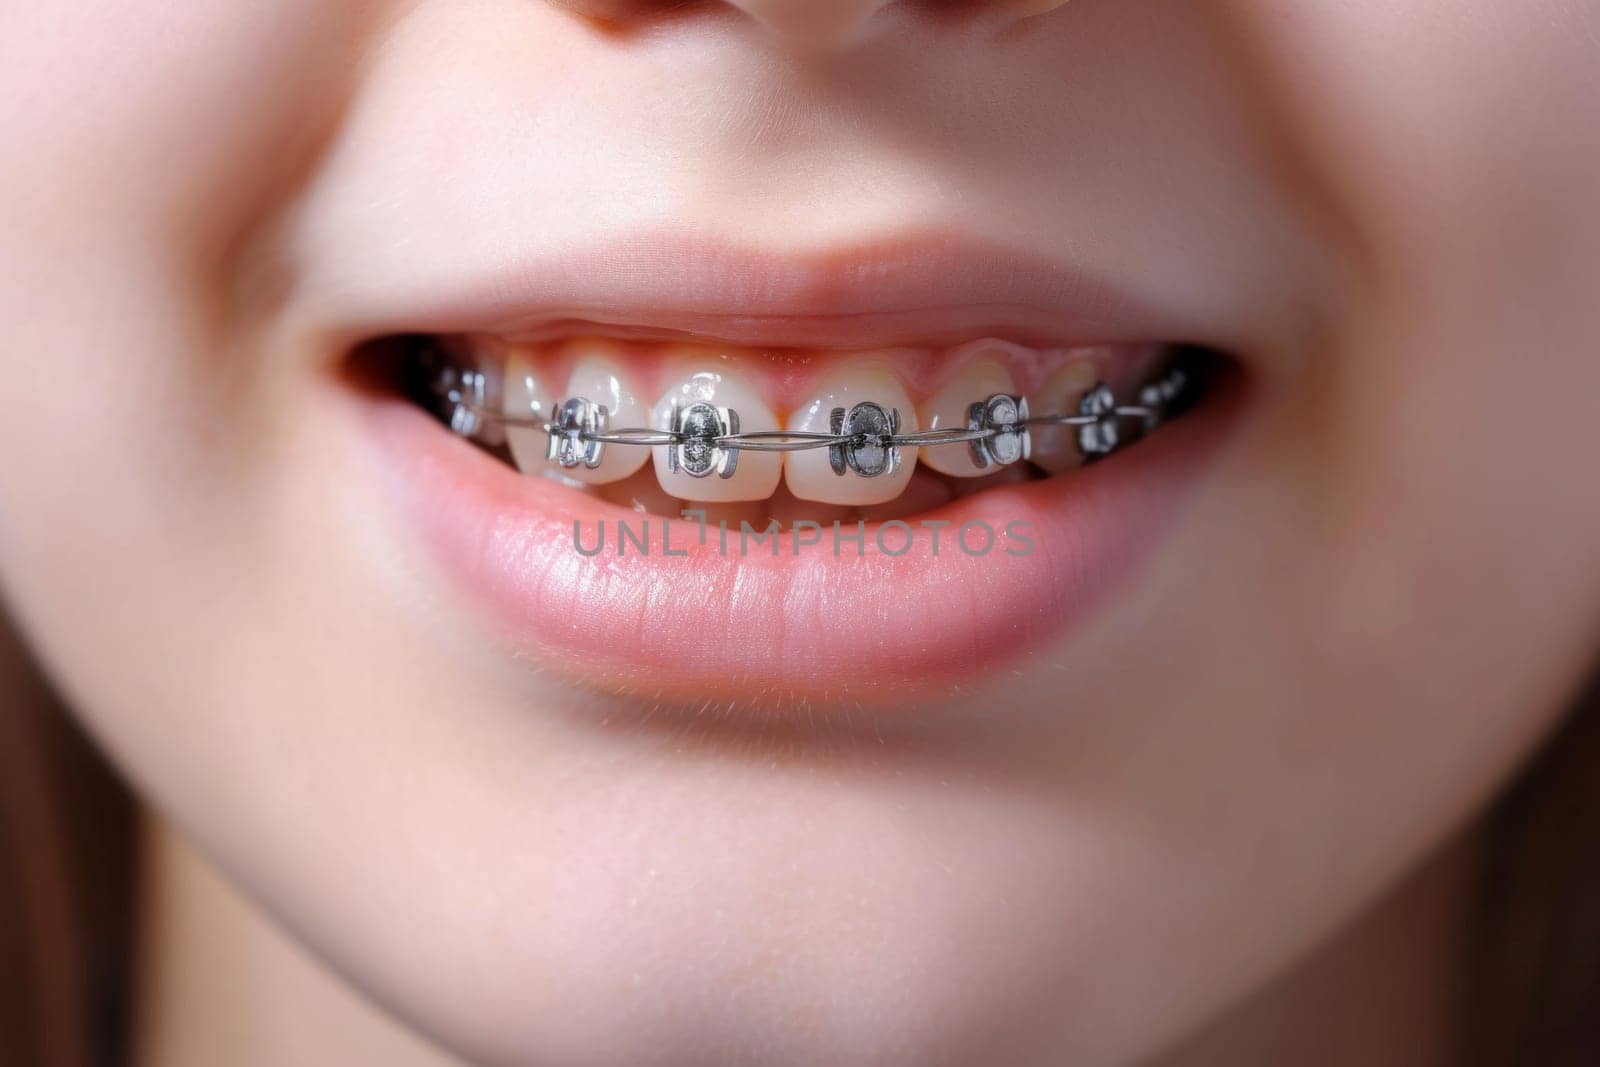 Frontal view of a woman mouth with braces. Close up image, unrecognizable person by papatonic